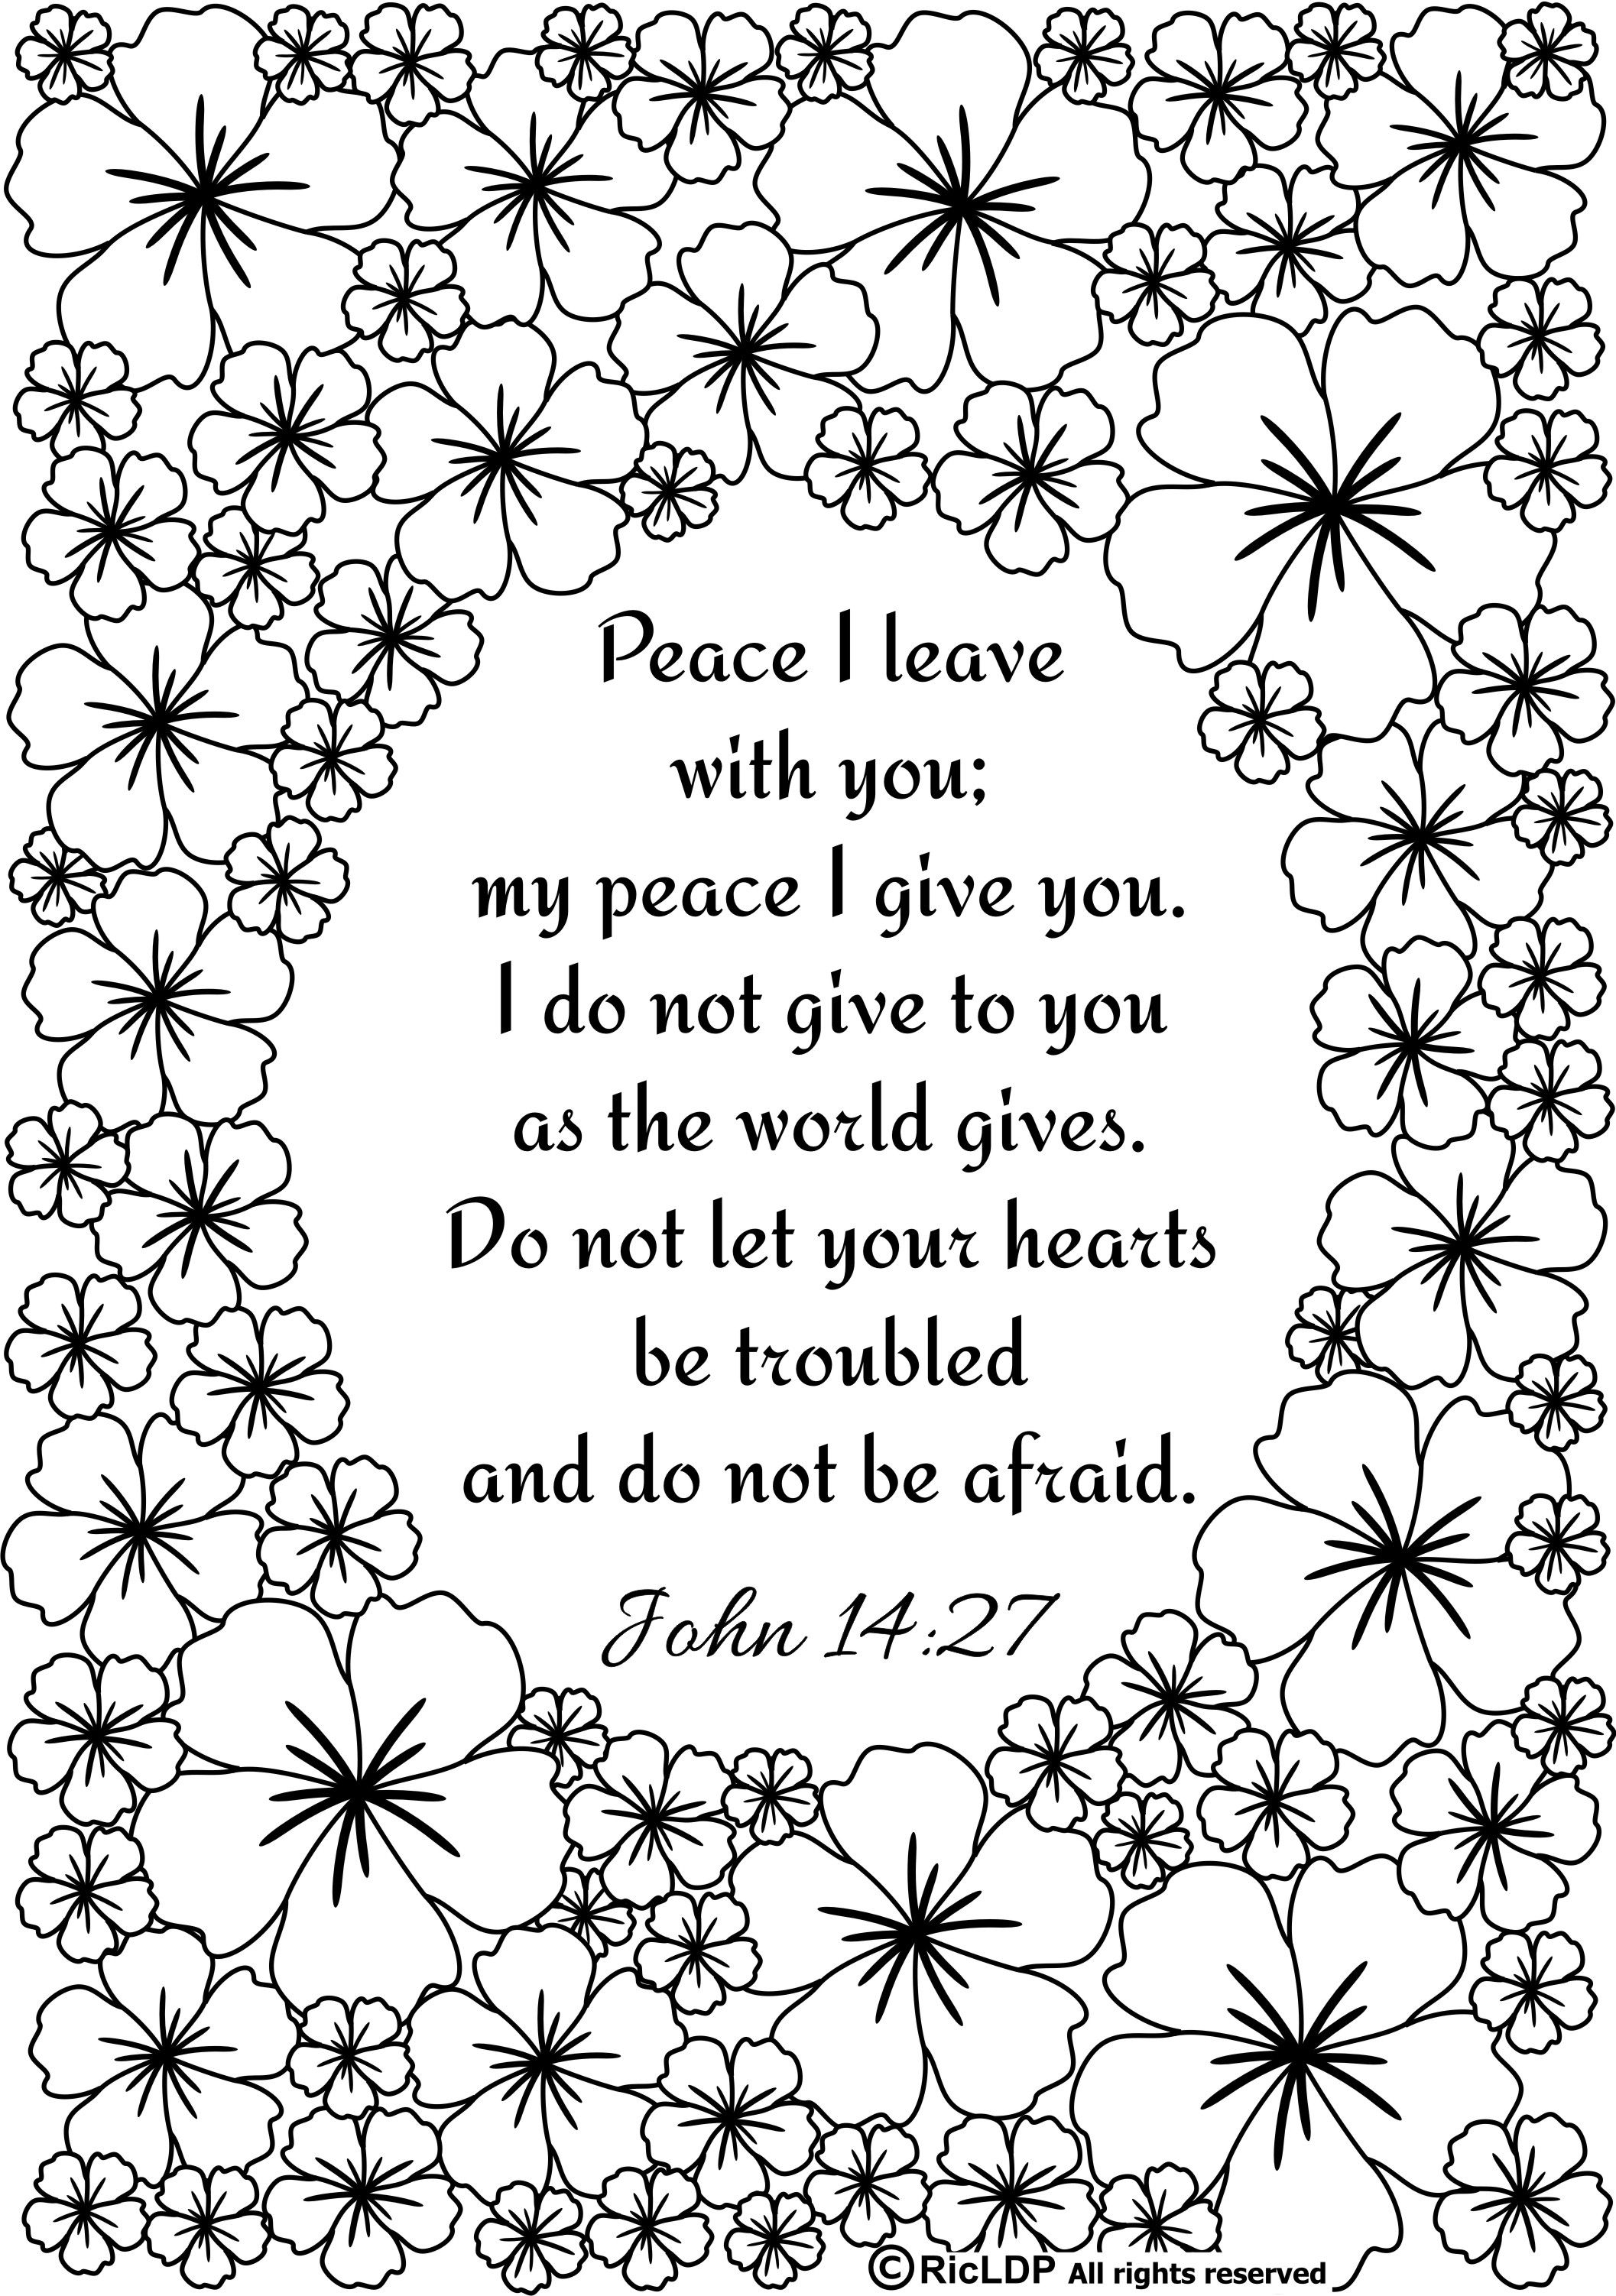 Ricldp Artworks (Ricldp) | Coloring Pages!!! | Pinterest | Bible - Free Printable Bible Coloring Pages With Verses